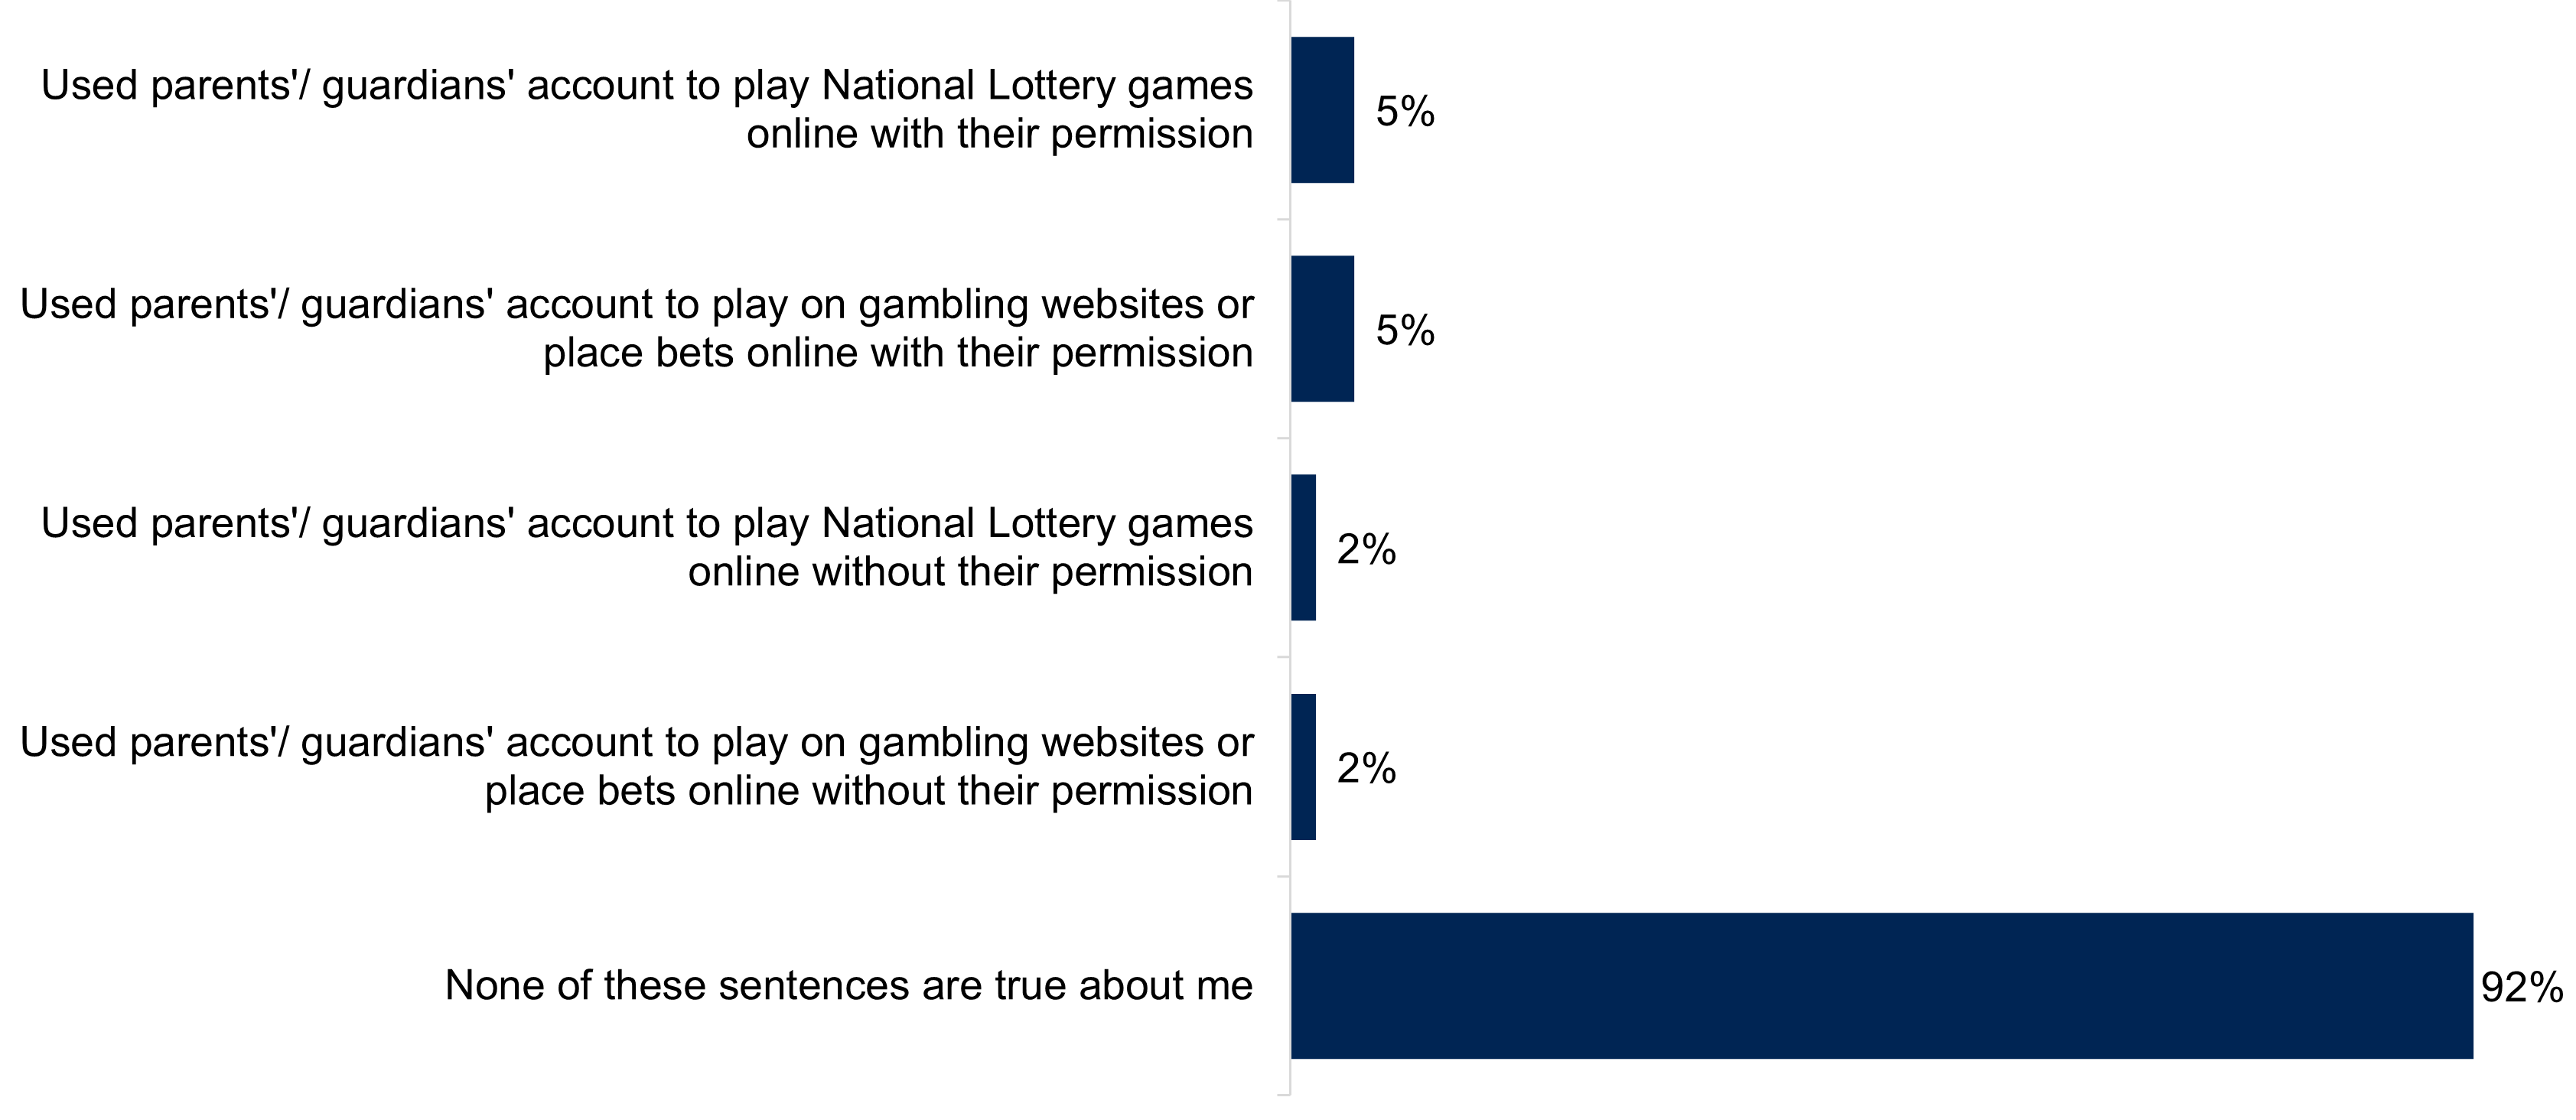 A bar chart showing whether young people gambled online with their parent's or guardian's account with their parent's or guardian's permission, from 'None of these sentences are true about me' to 'Used parent's and/or guardian's account to play National Lottery games online with their permission'. Data from the chart is provided within the following table.